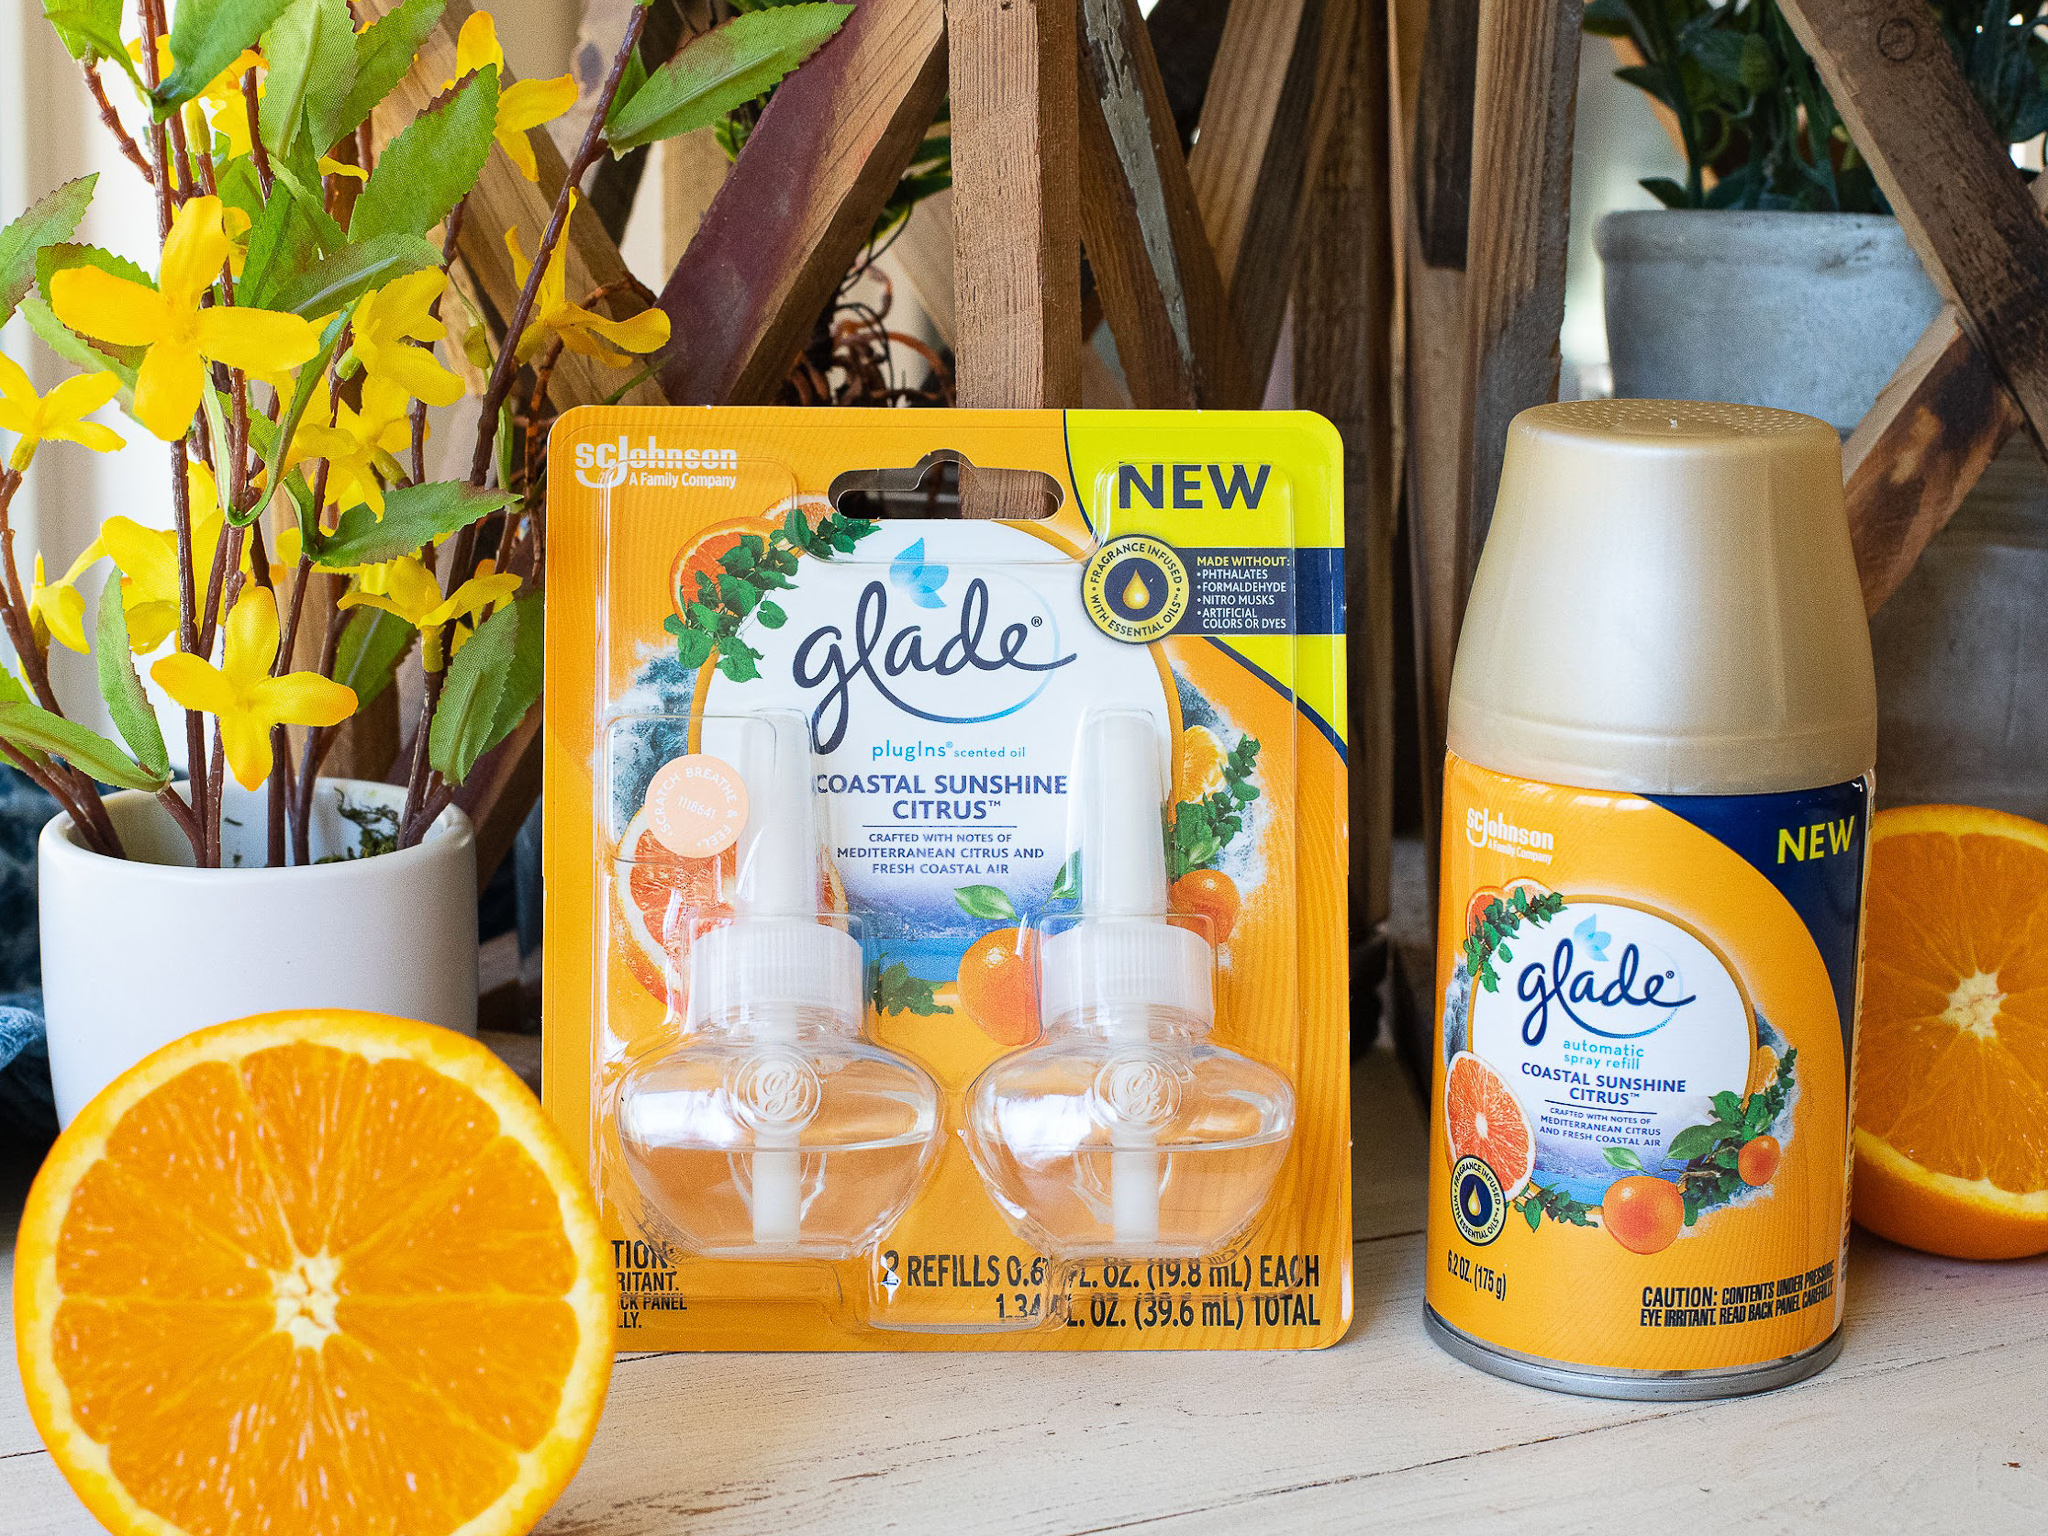 Glade® Coastal Sunshine Citrus Is New And Available At Publix - Try The New Fragrance For FREE With A $100 Publix Gift Card on I Heart Publix